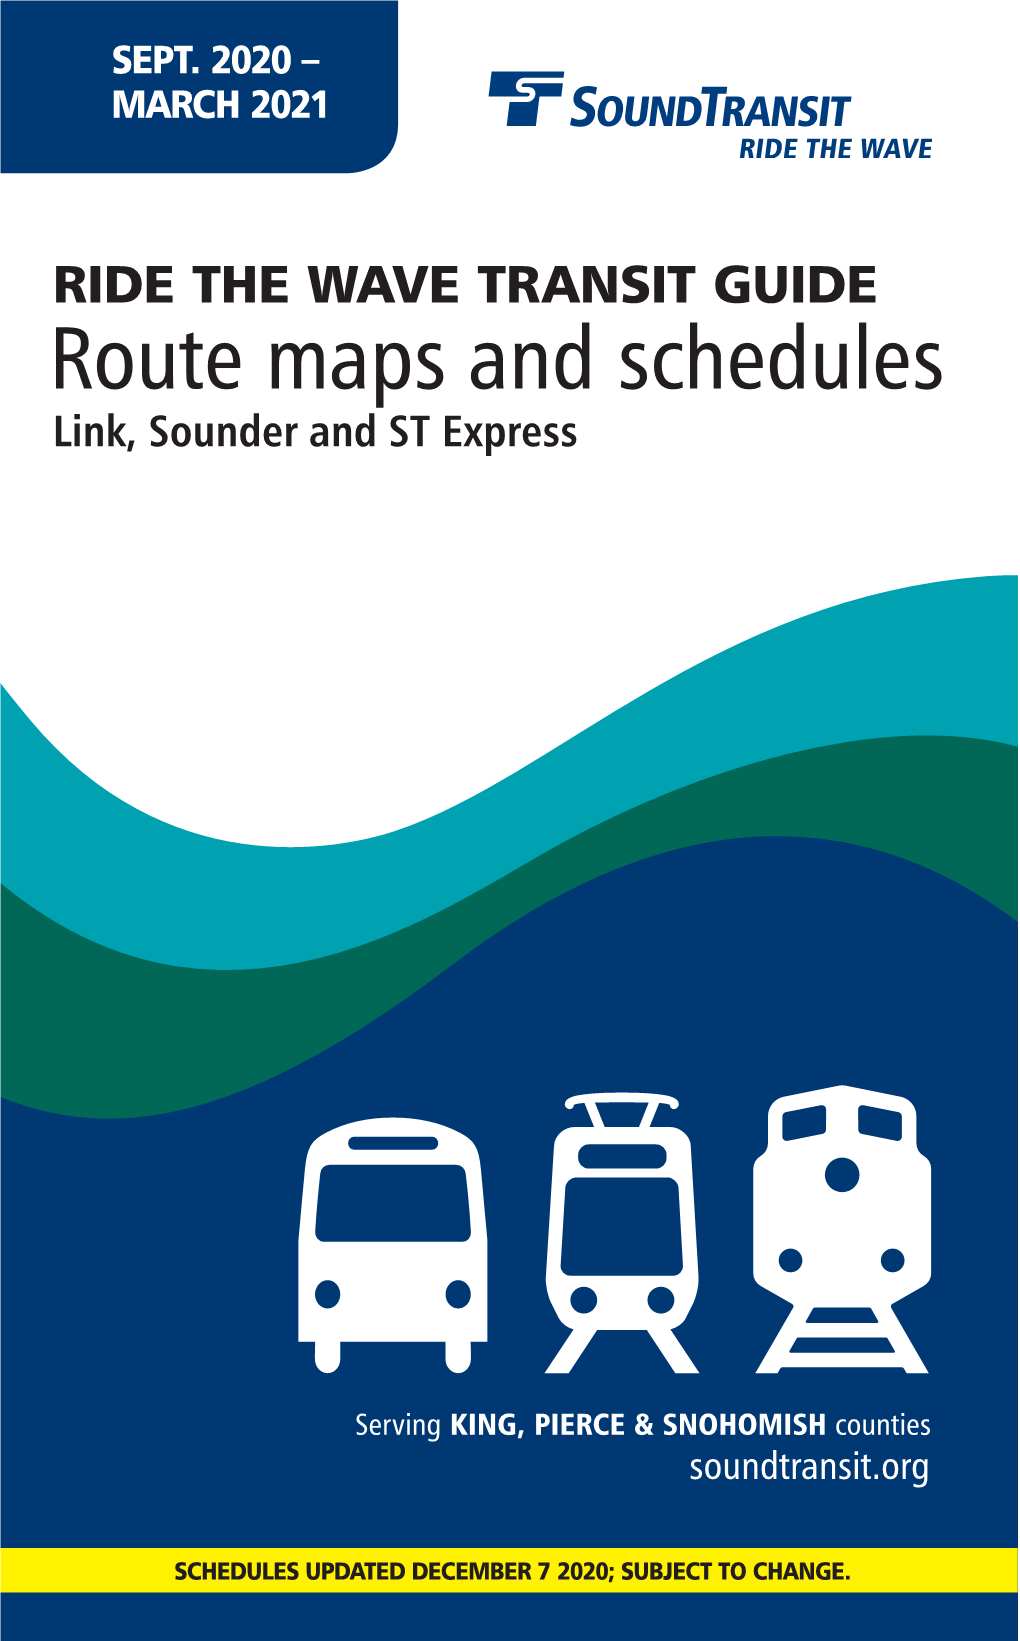 Ride the Wave Transit Guide, September 2020